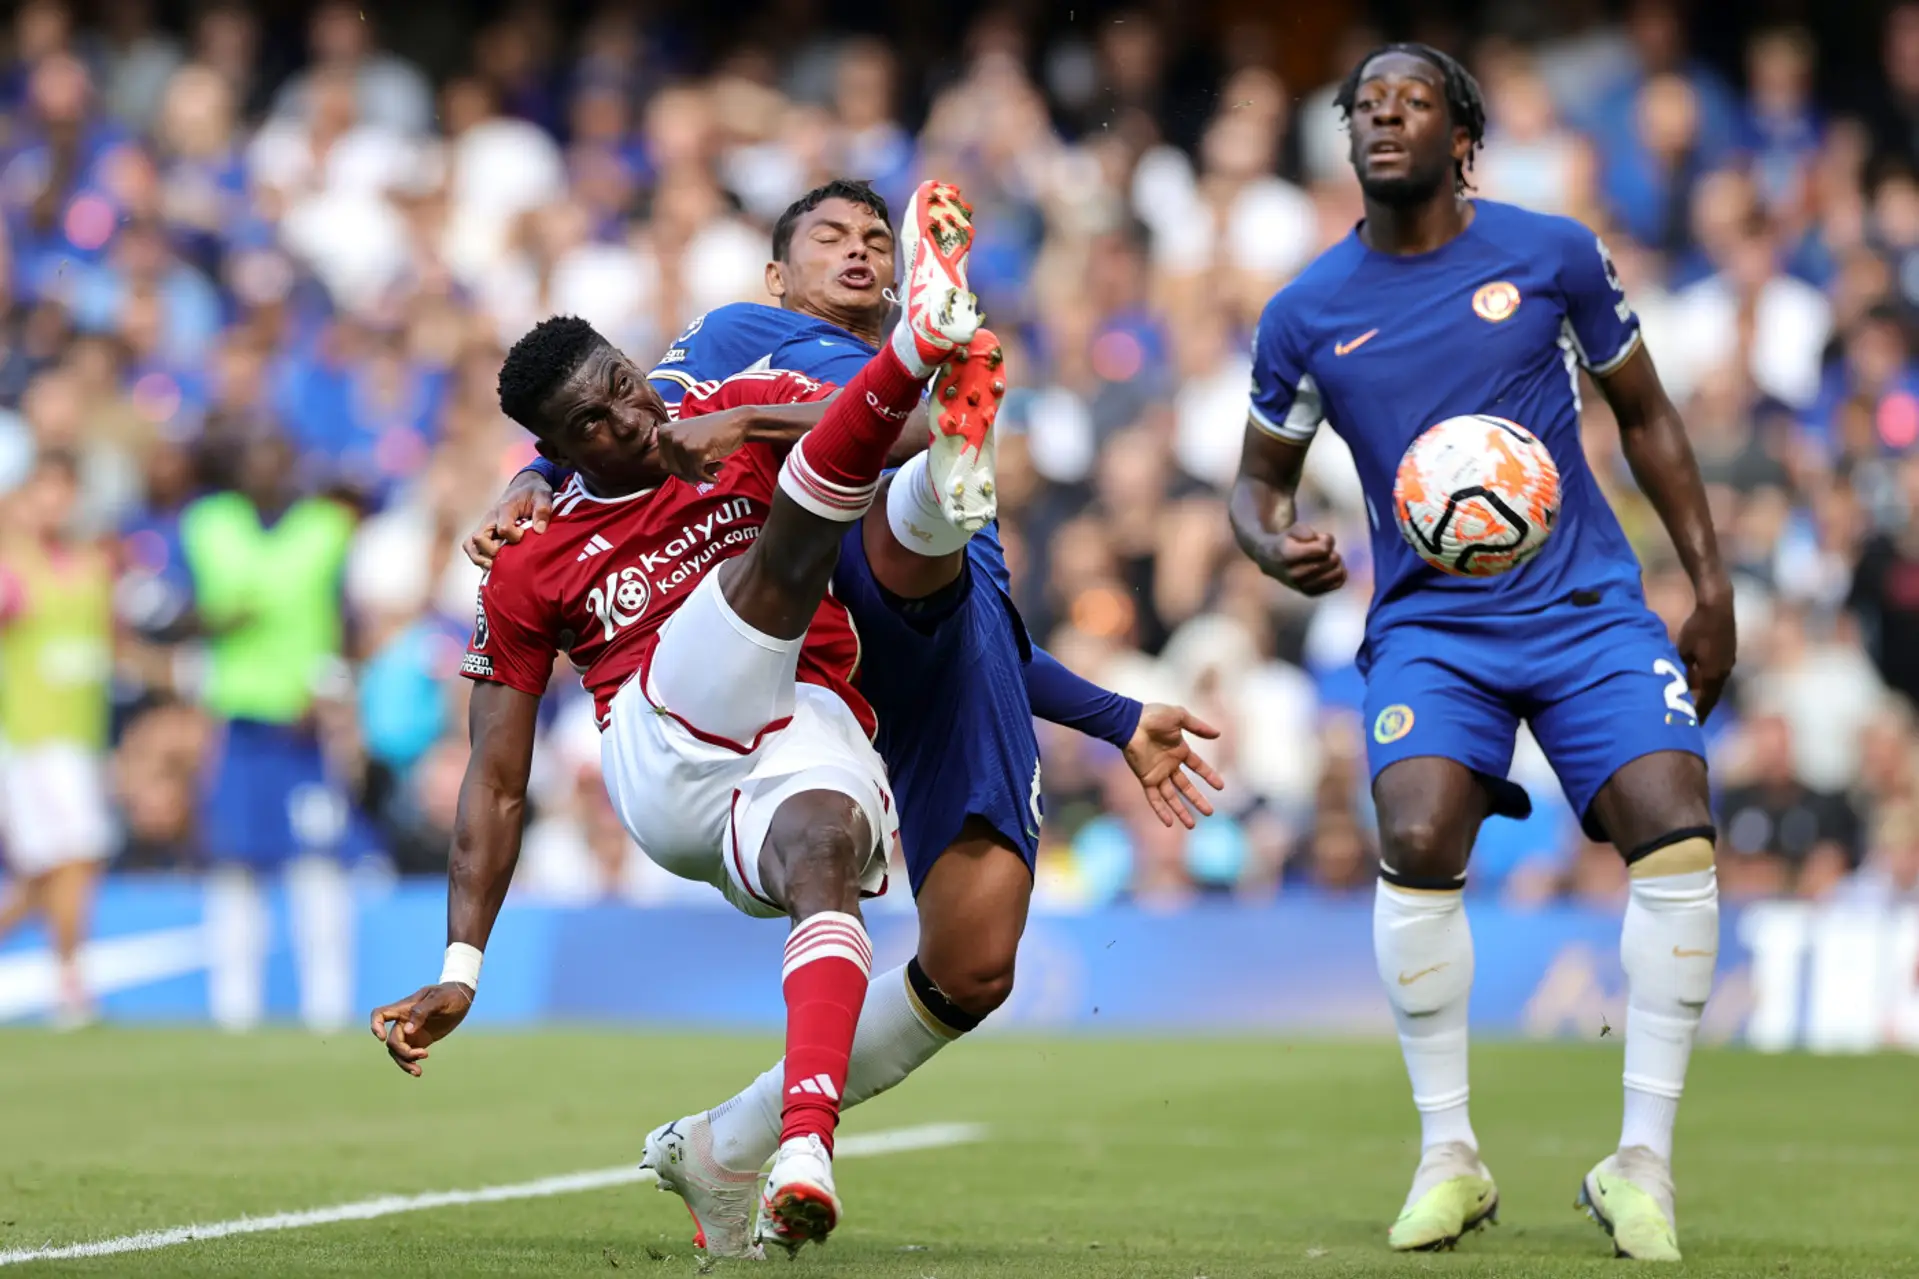 Nottingham Forest vs Chelsea: Predictions, odds and best tips